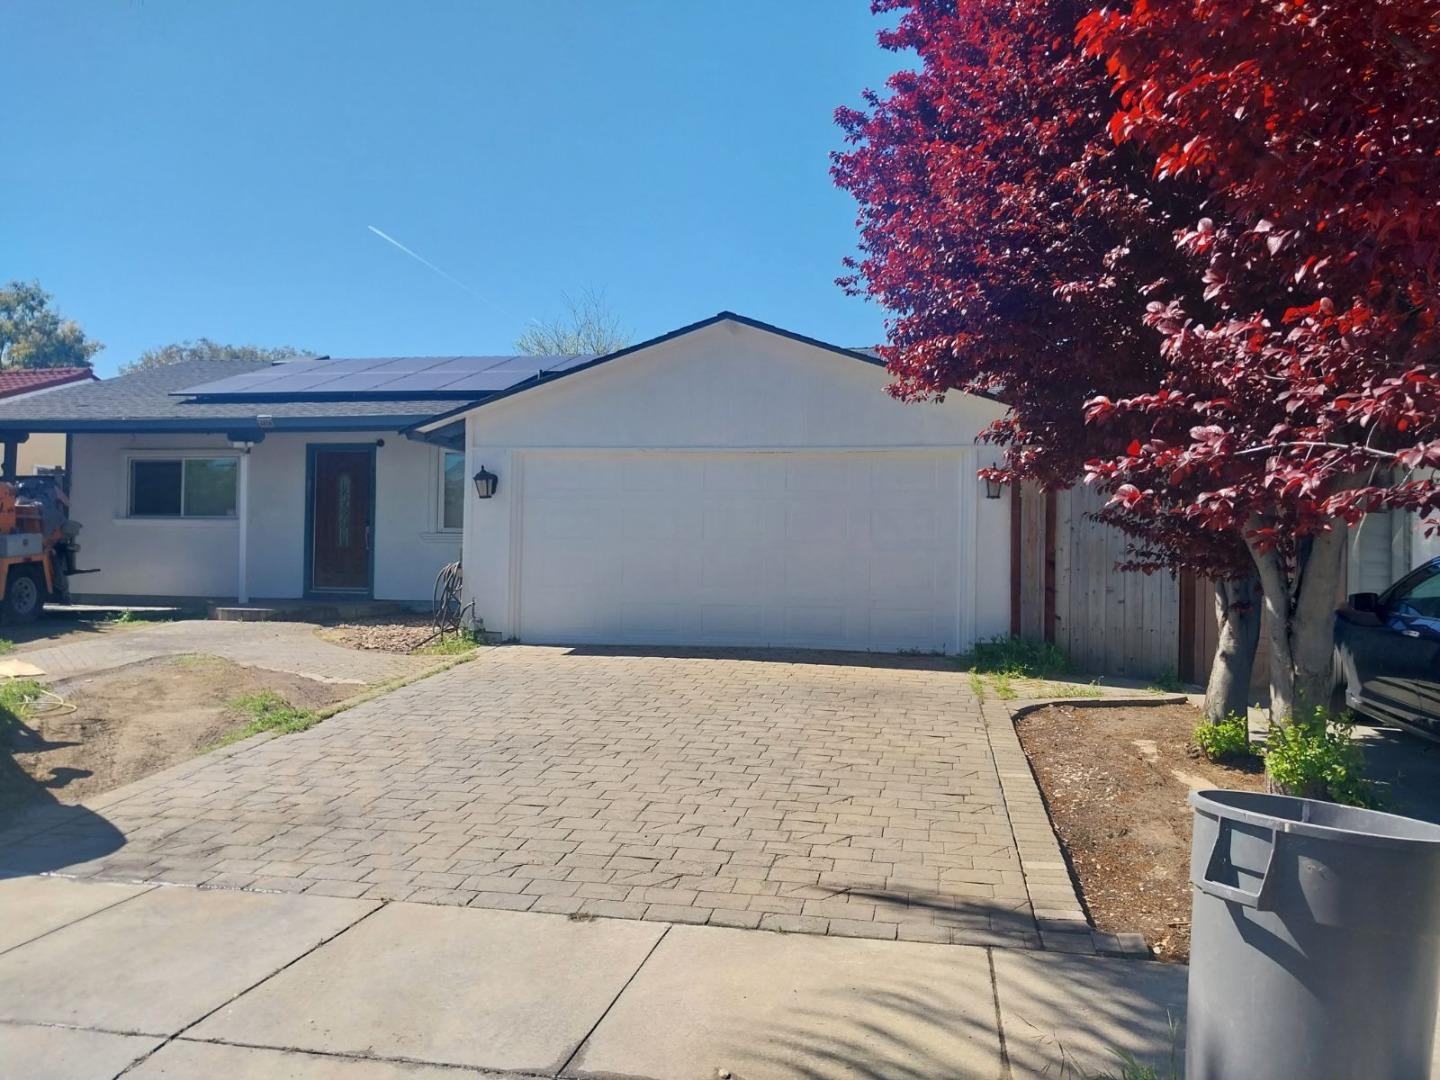 Photo of 4656 Rotherhaven Wy in San Jose, CA